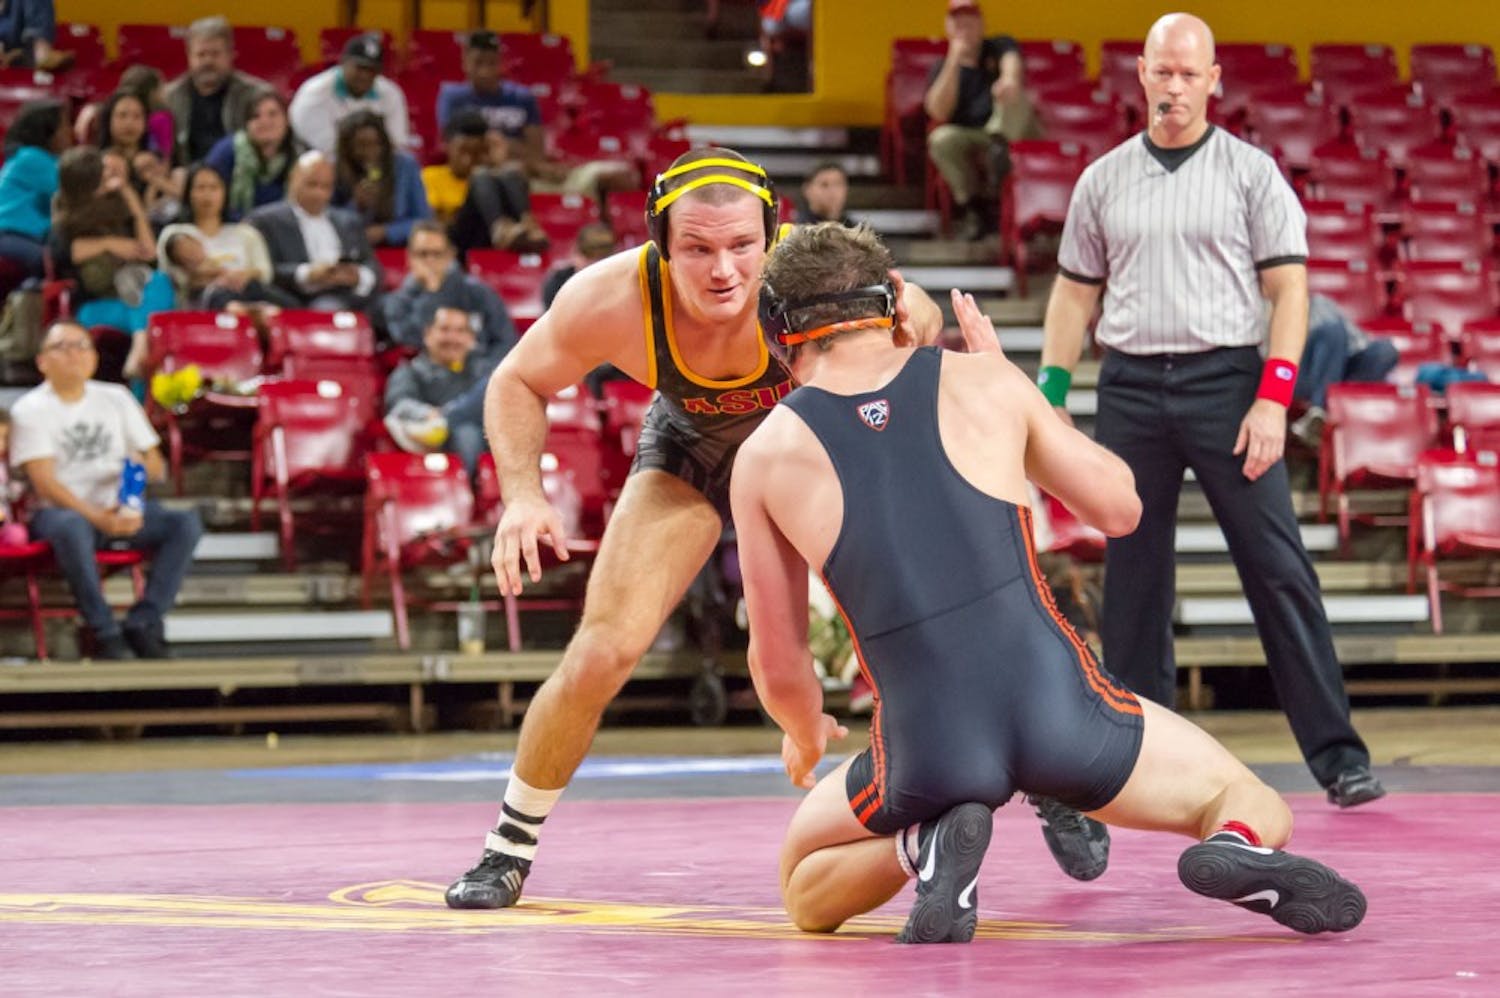 Redshirt senior Blake Stauffer faces off against Corey Griego from Oregon State on Friday, Jan. 29, 2016 at the Wells Fargo Arena in Tempe.